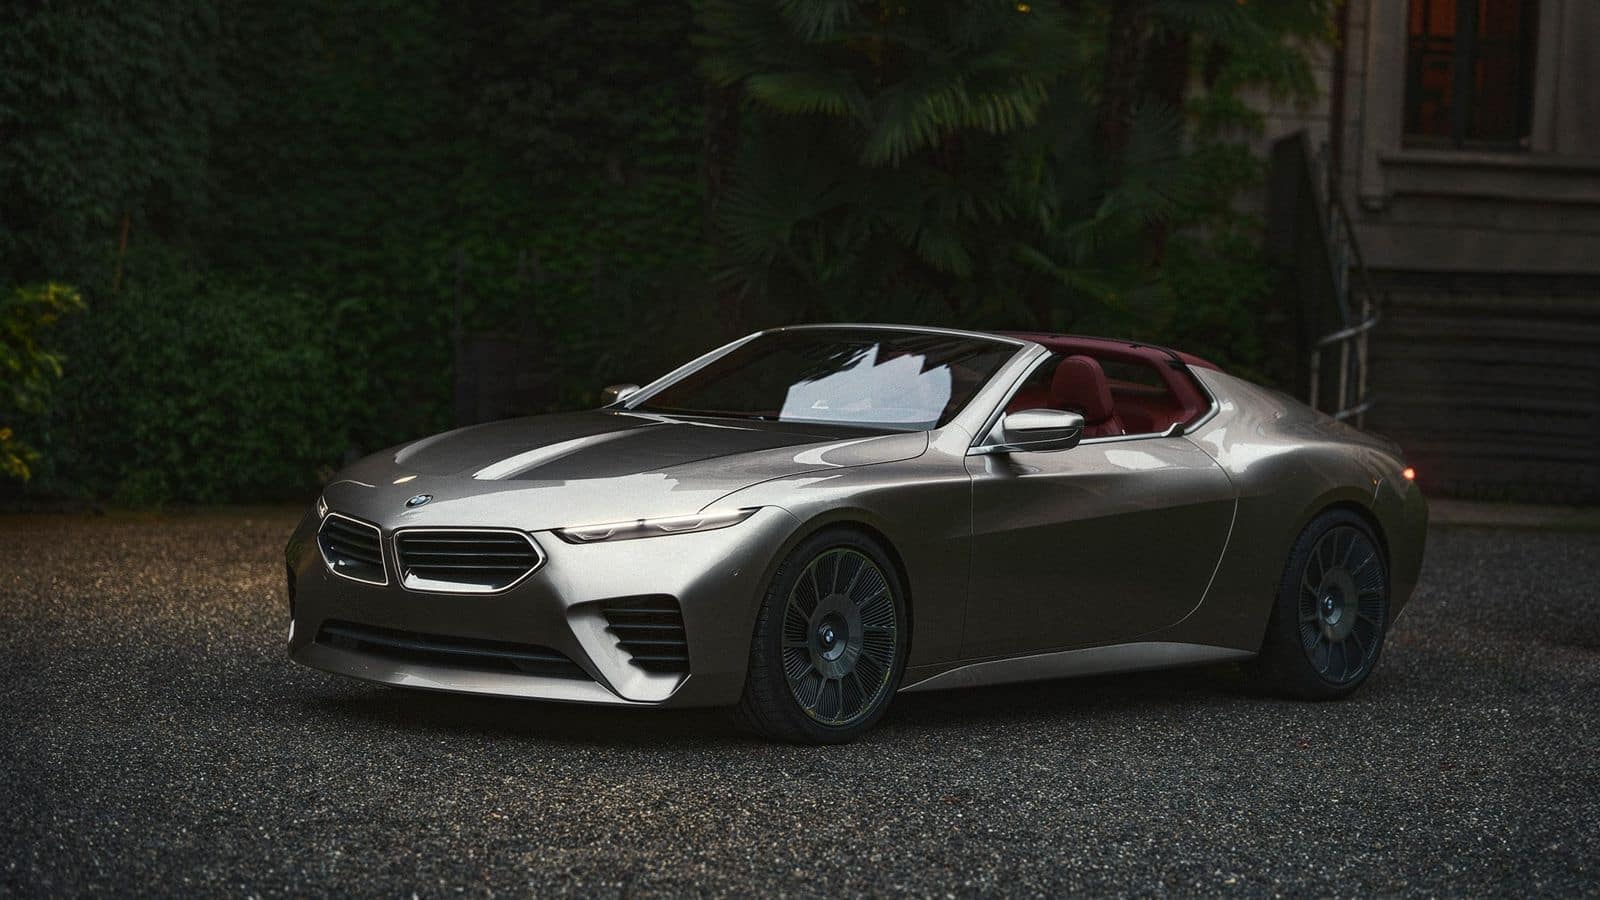 BMW unveils new Concept Skytop roadster at Concours d'Elegance event